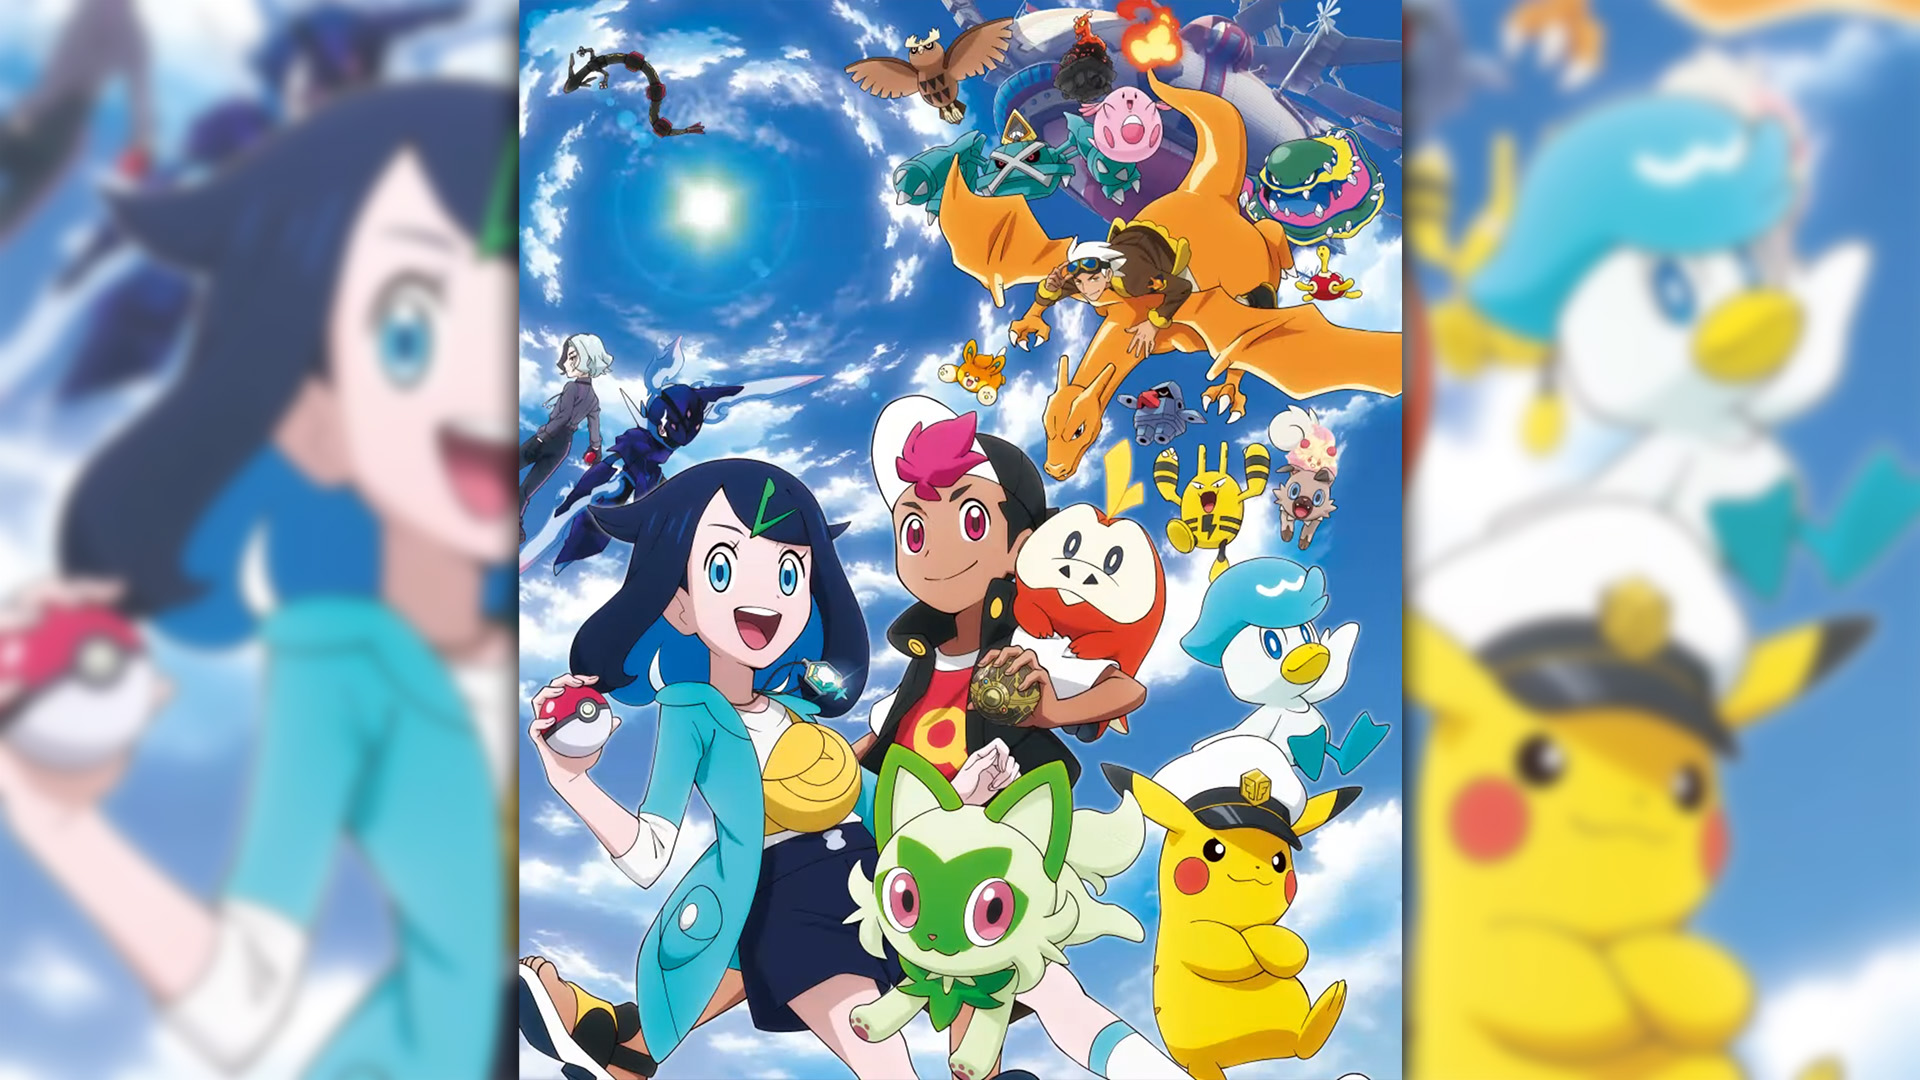 Fuecoco Is The Star Of The New Pokémon Scarlet and Violet Anime